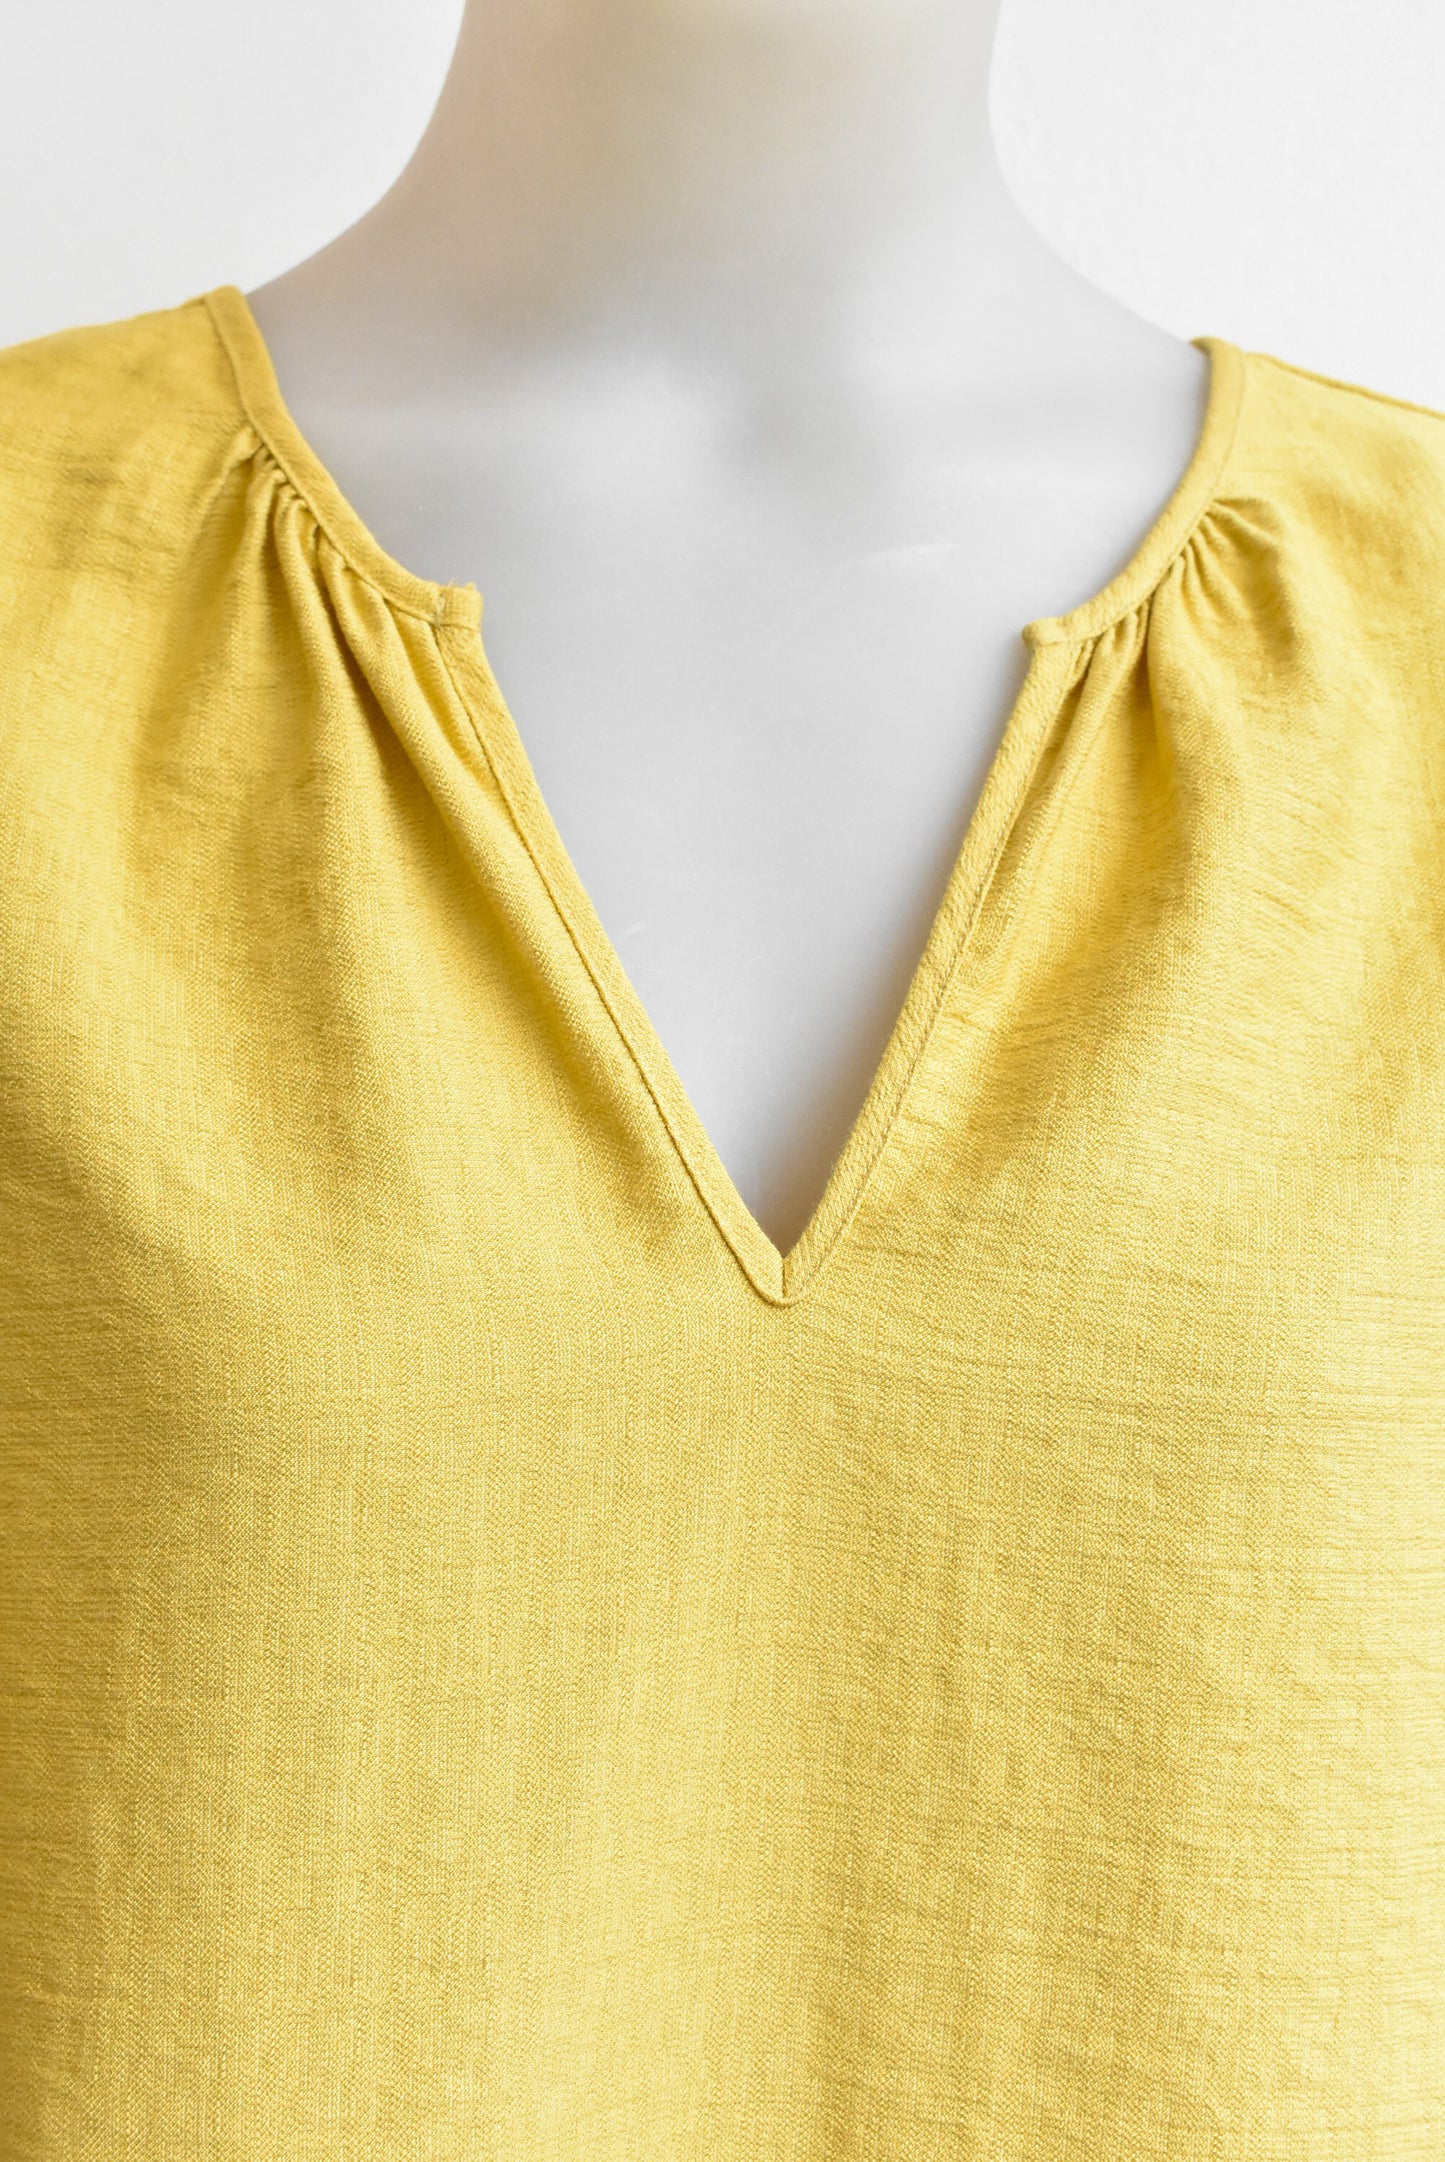 Seed yellow flared sleeve top, size S